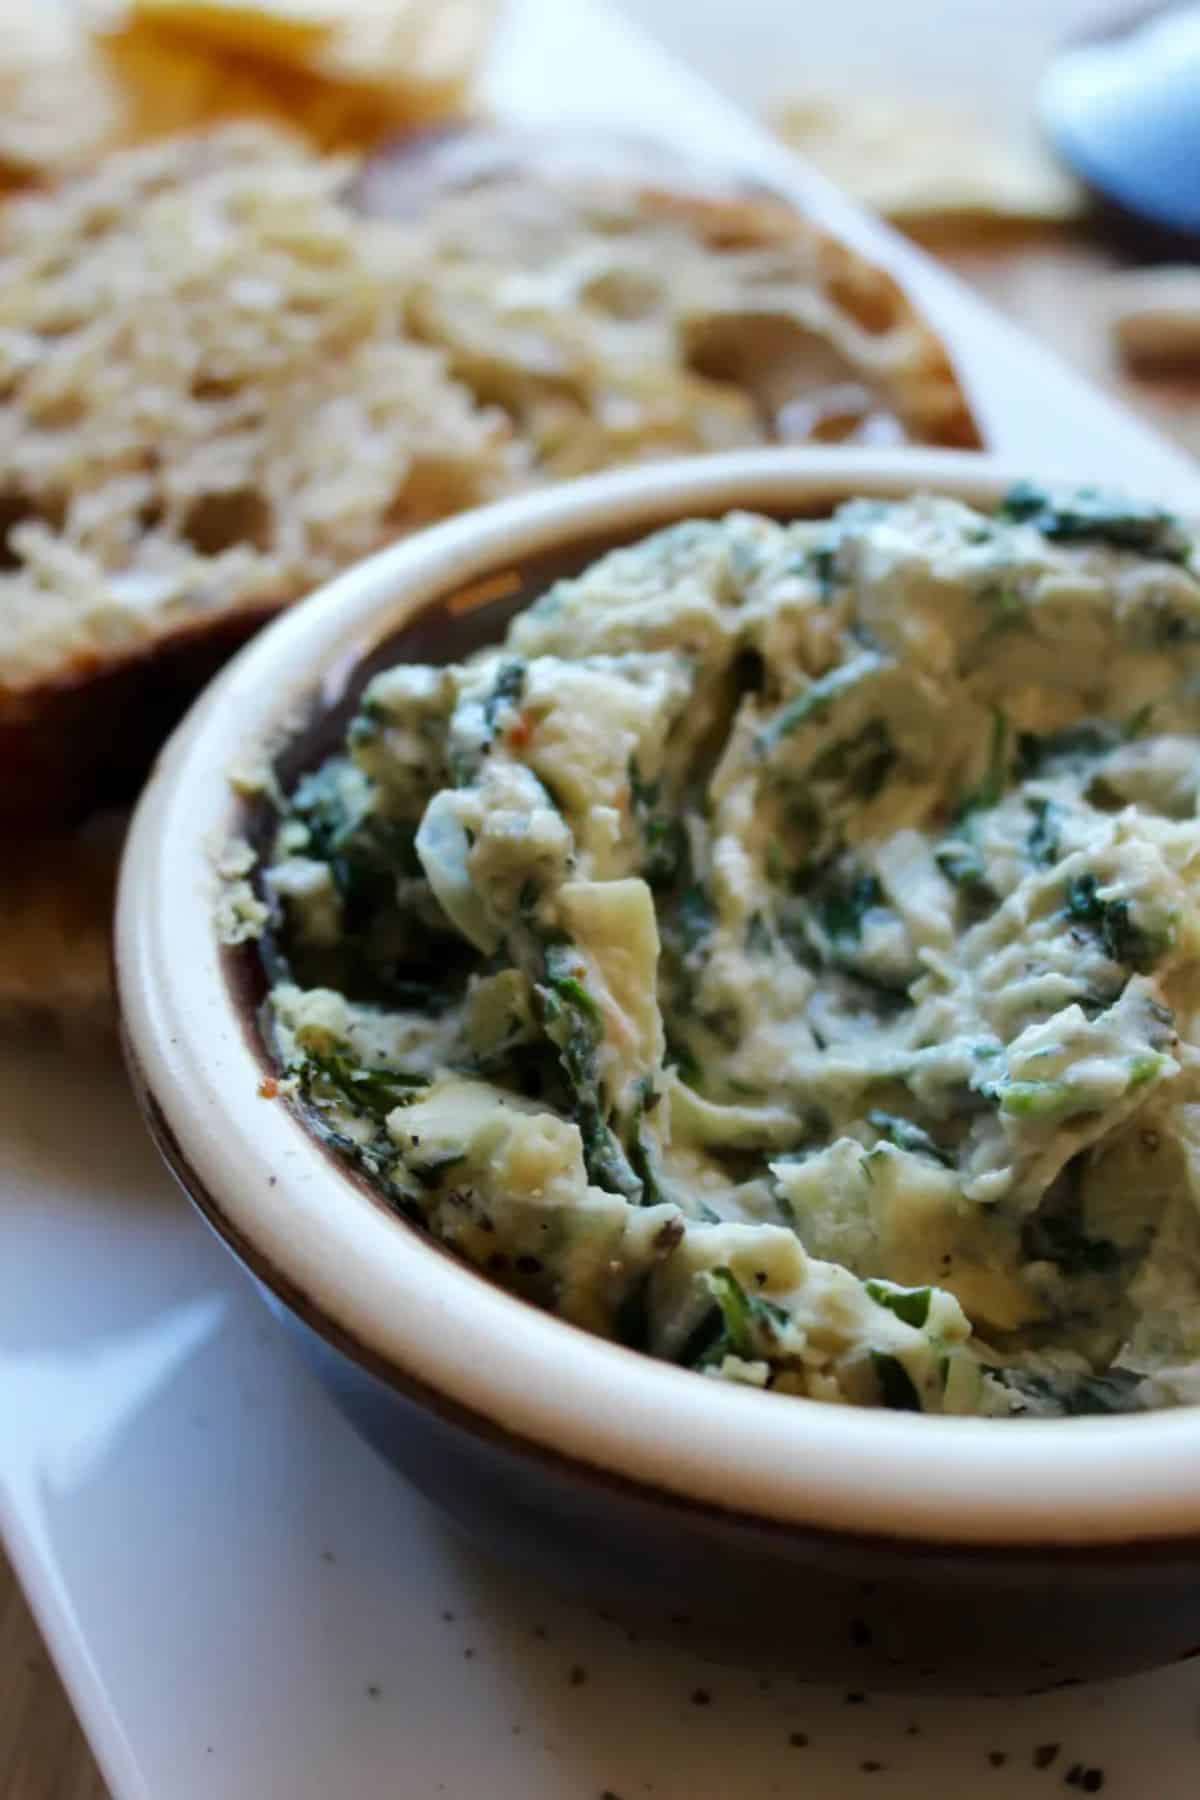 Hot Spinach Artichoke and White Bean Dip in a brown bowl.